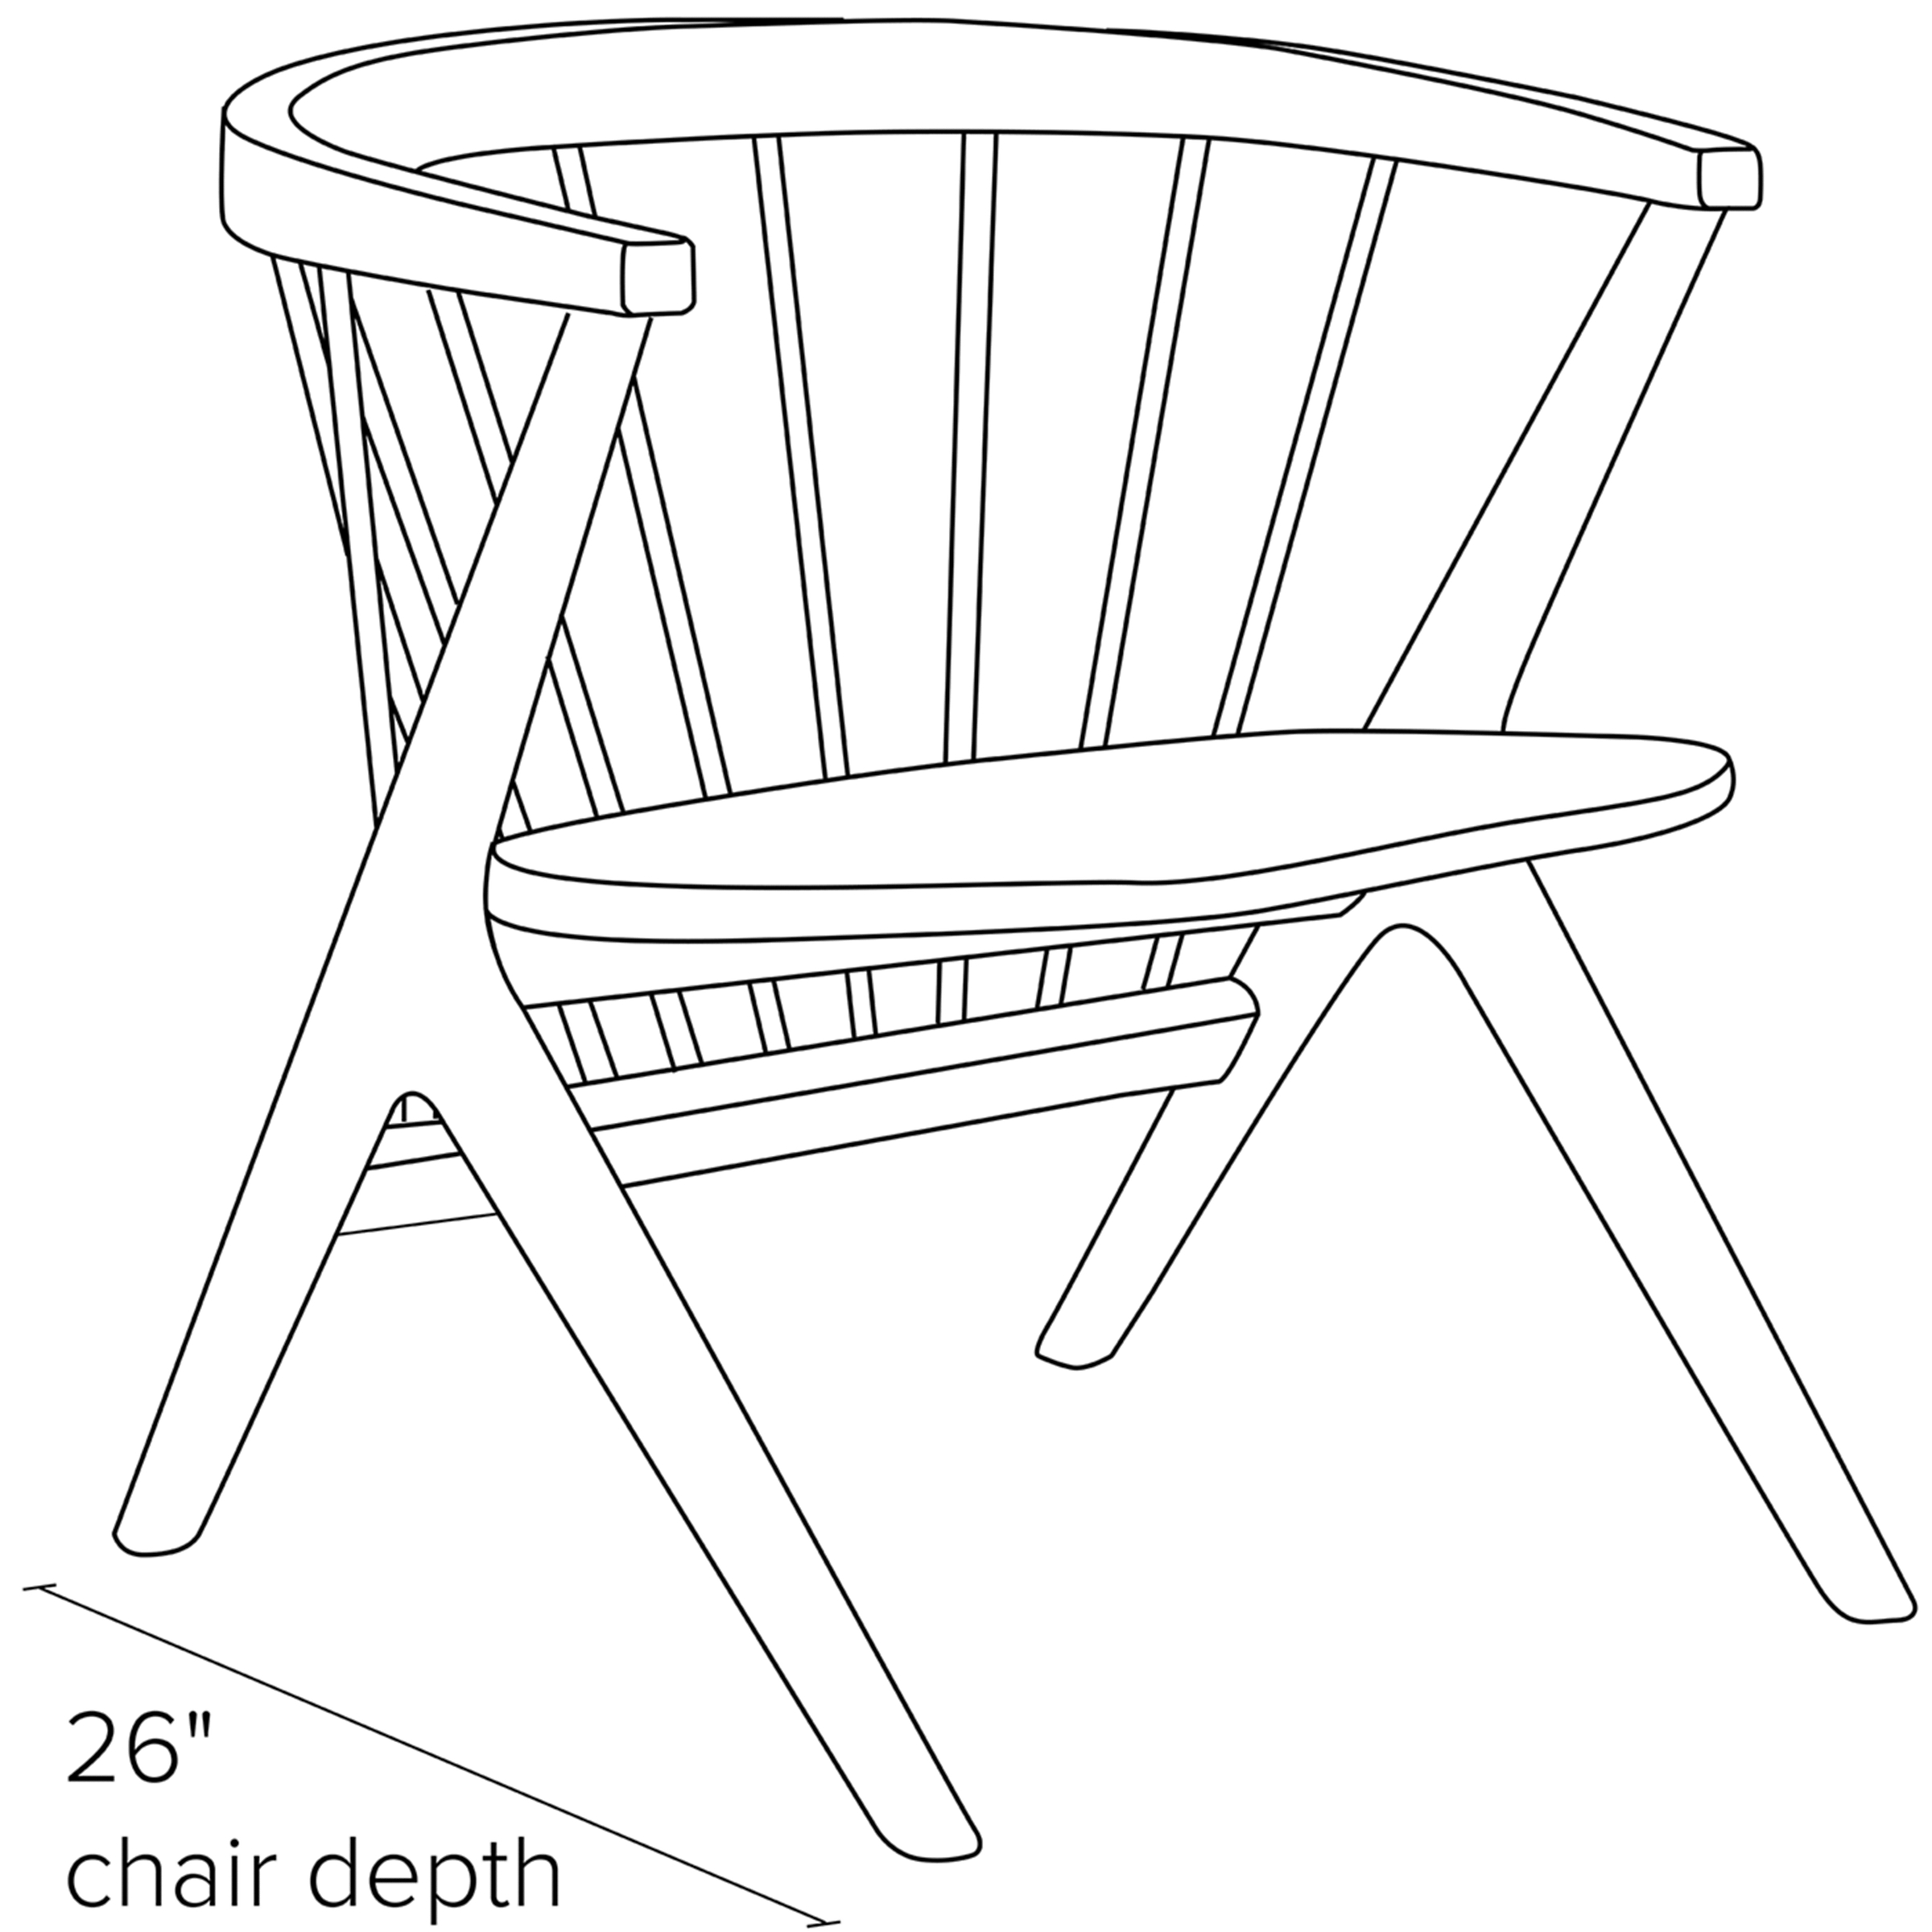 Side view dimension illustration of Soren chair.